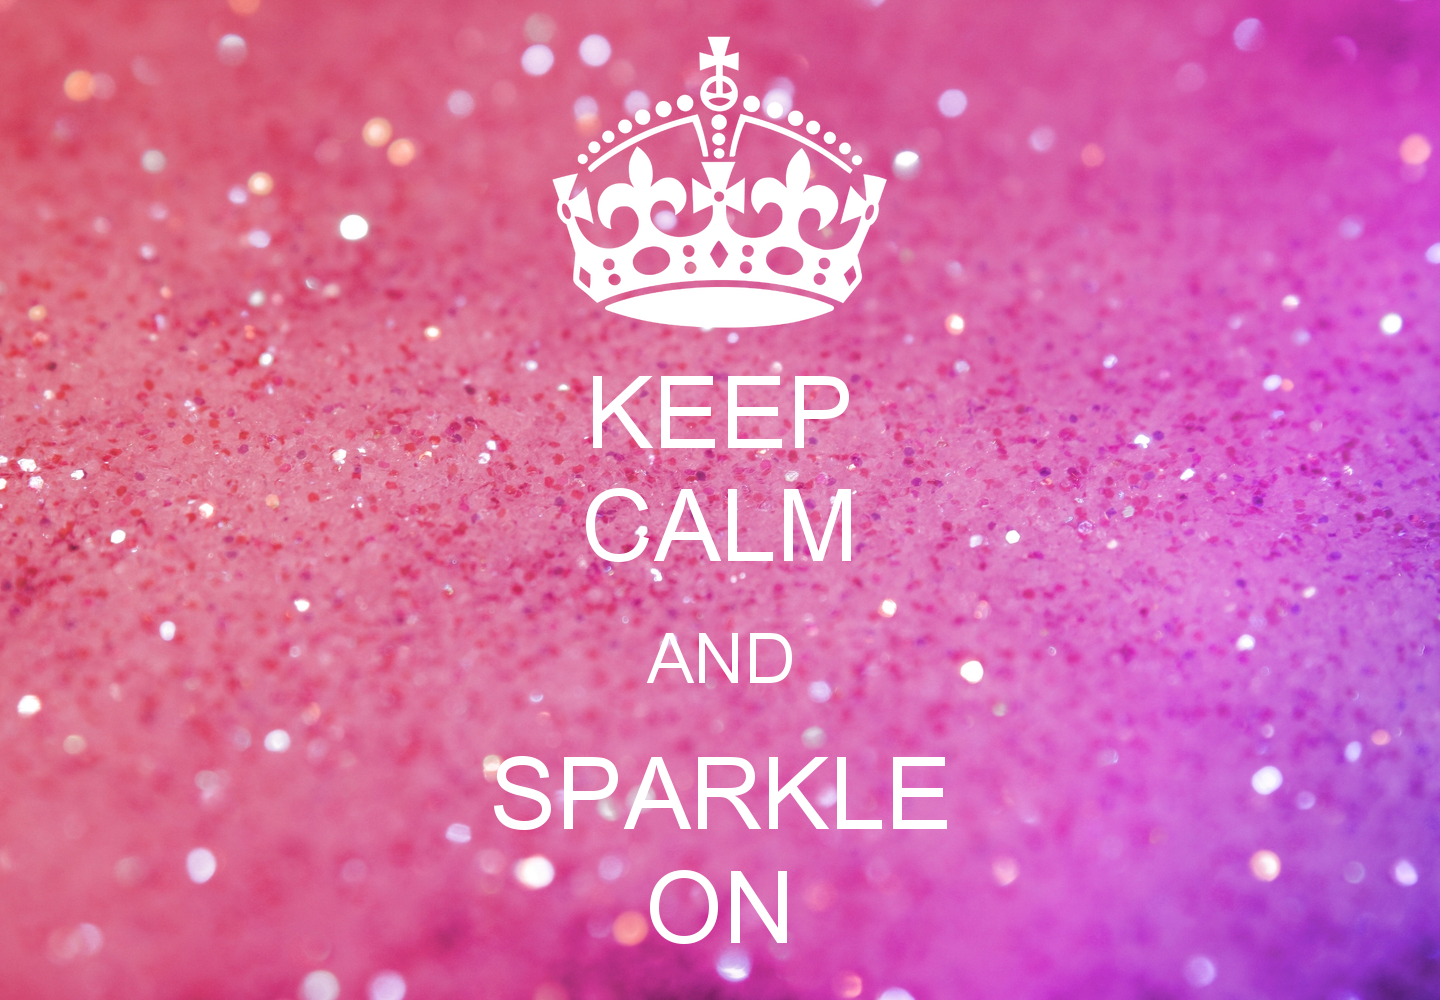 KEEP CALM AND SPARKLE ON   KEEP CALM AND CARRY ON Image Generator 1440x1000